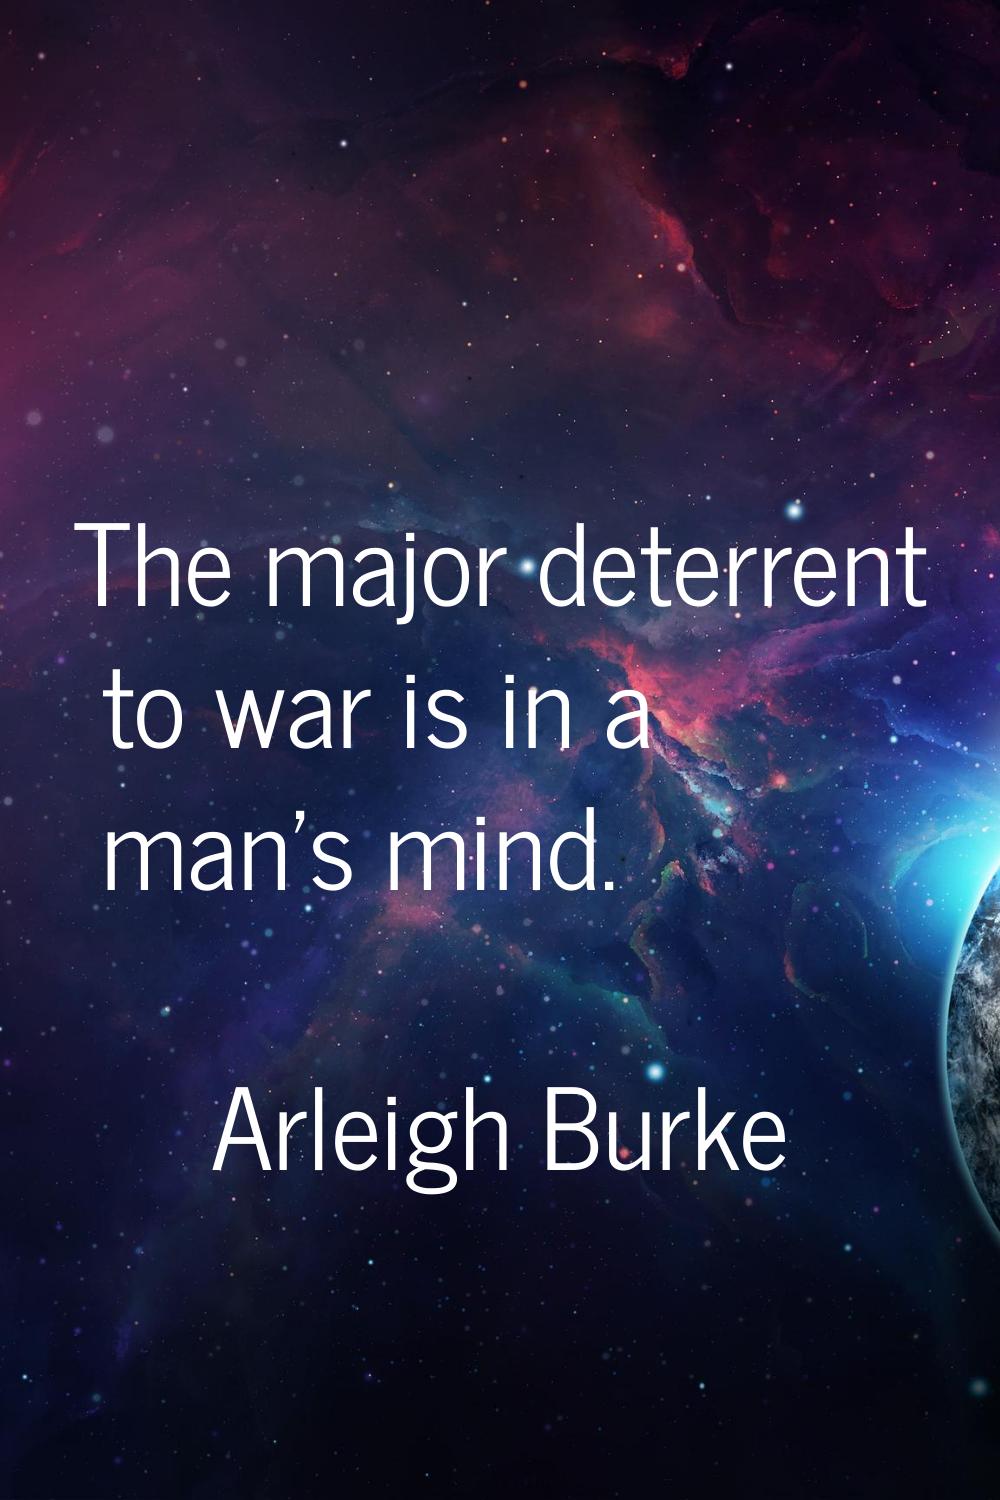 The major deterrent to war is in a man's mind.